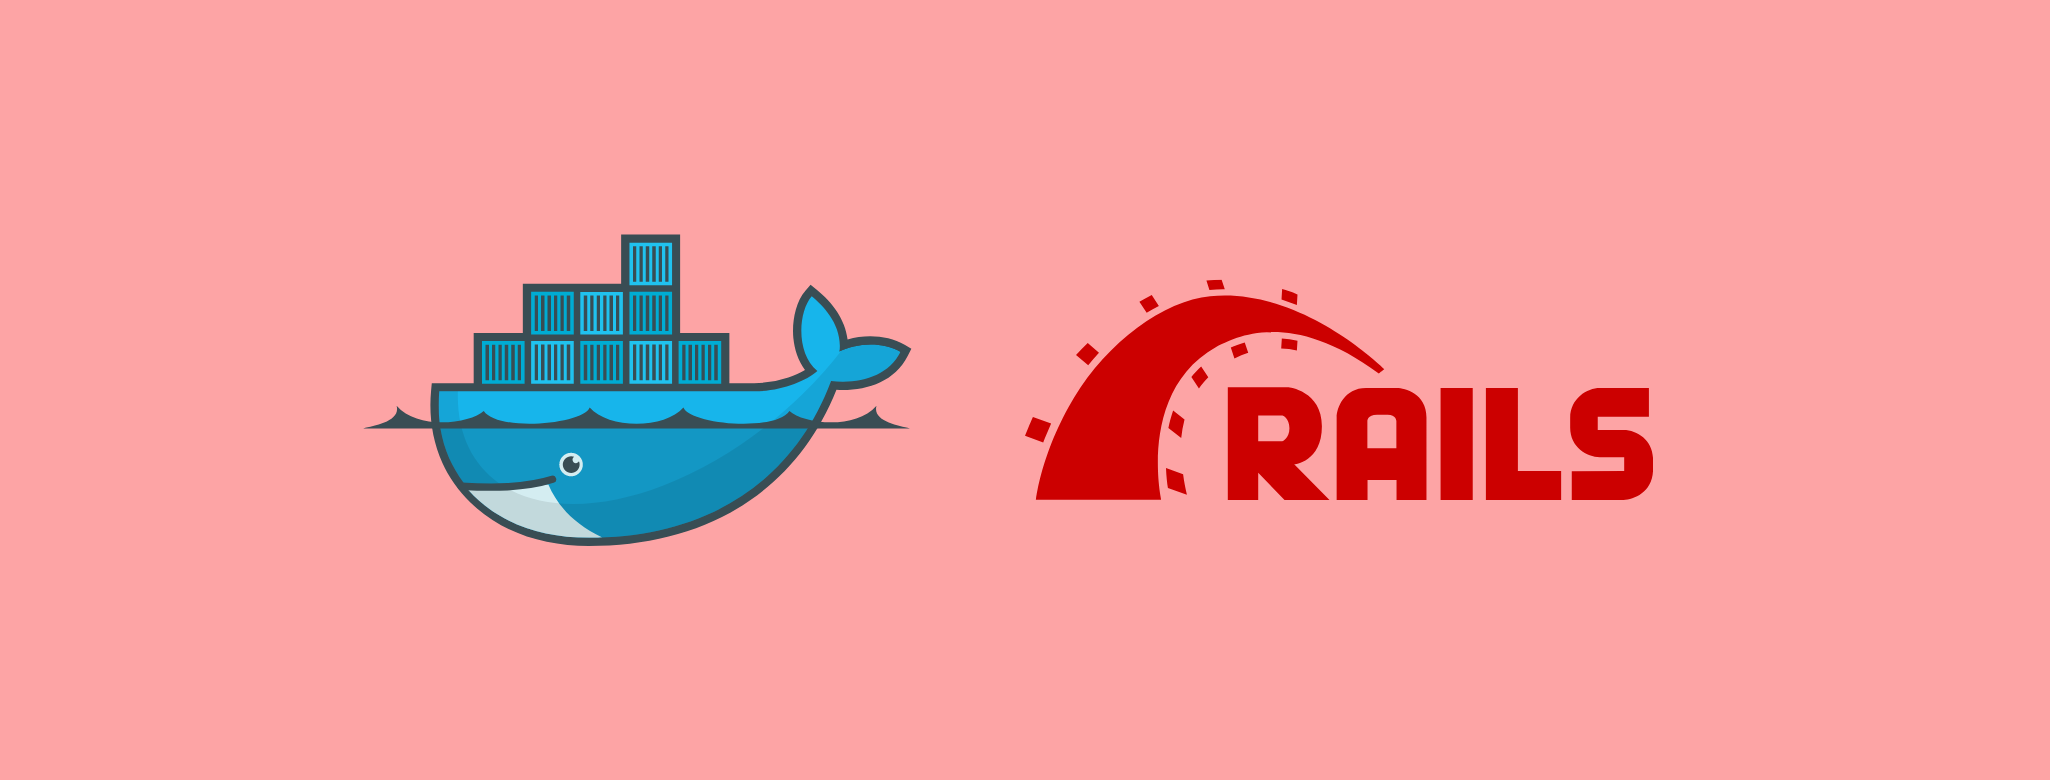 Rails templates with docker